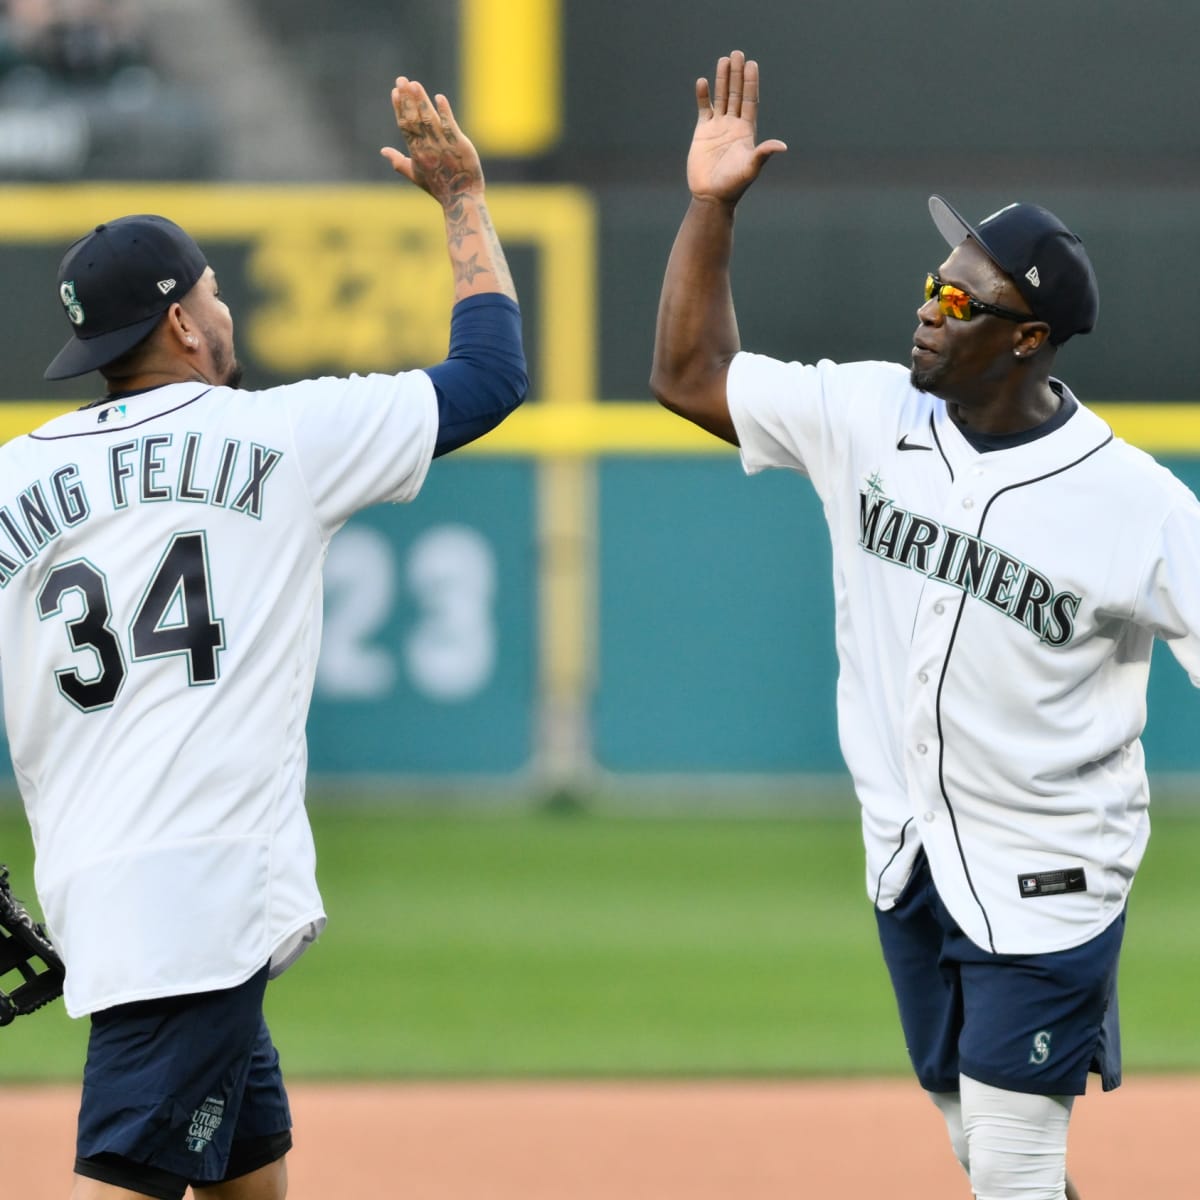 Photos: Major League Baseball All-Star Week wraps up in Seattle